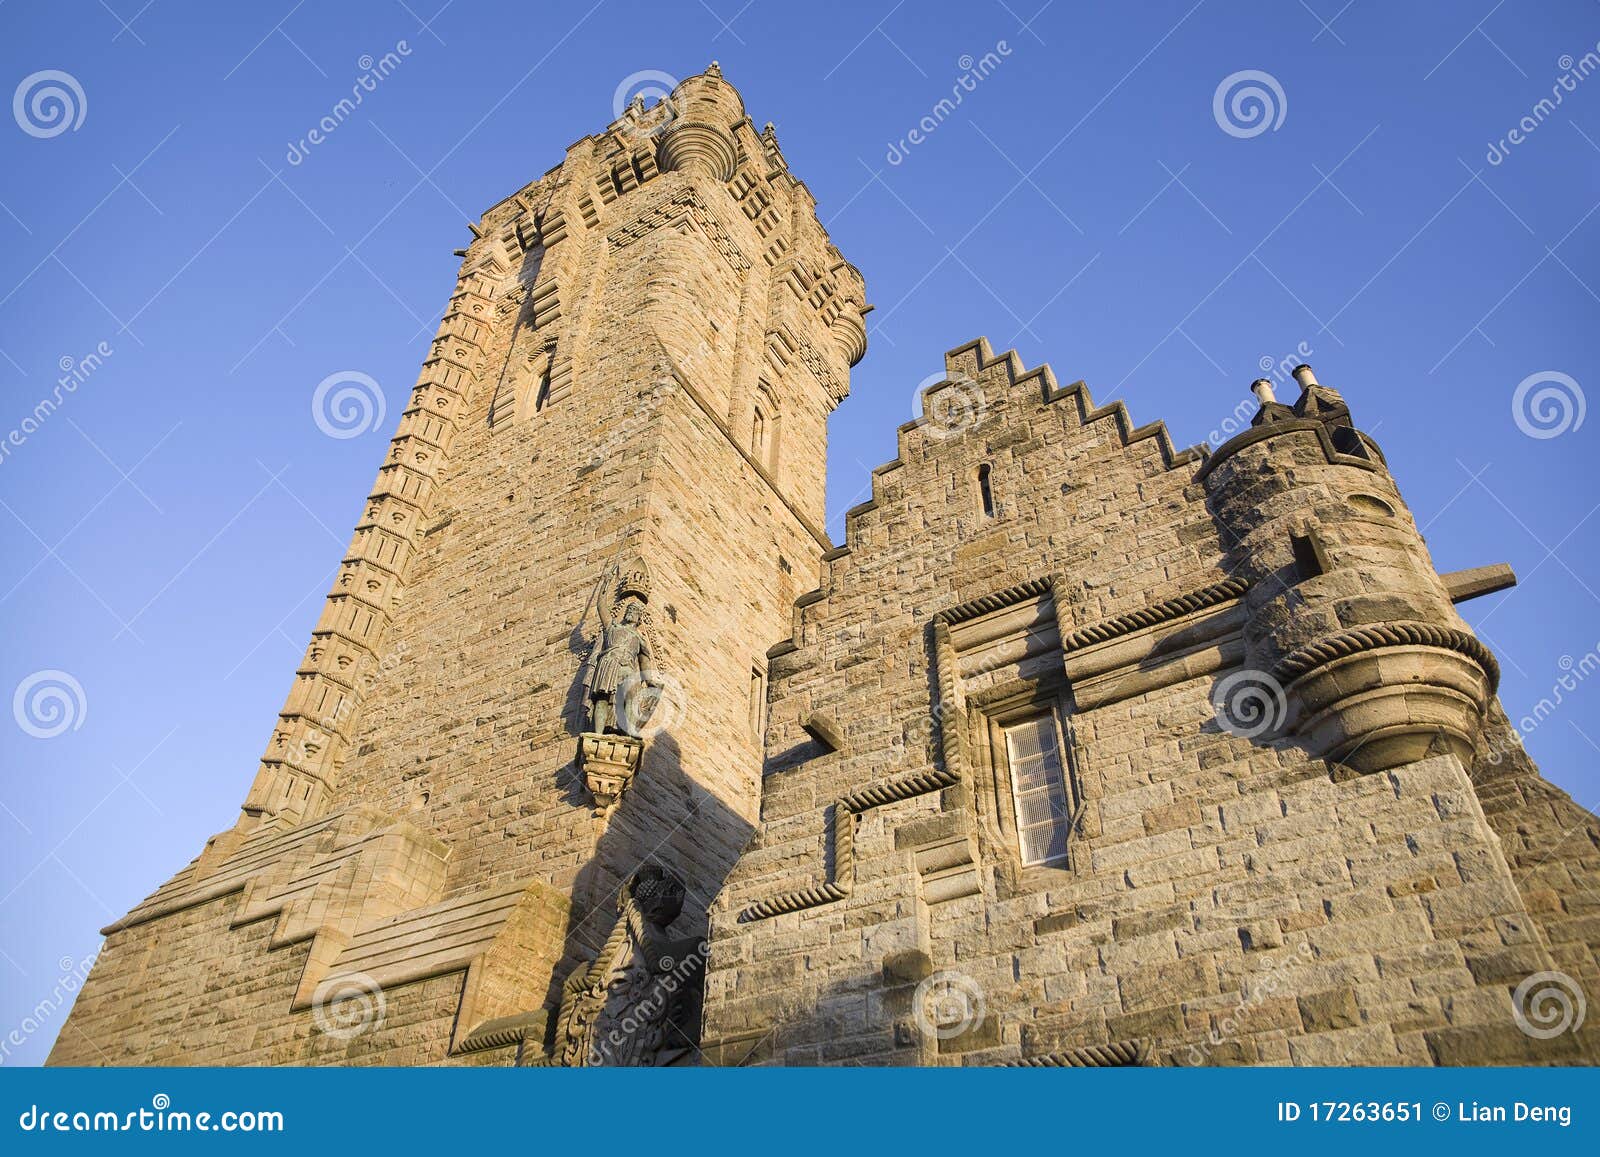 national wallace monument